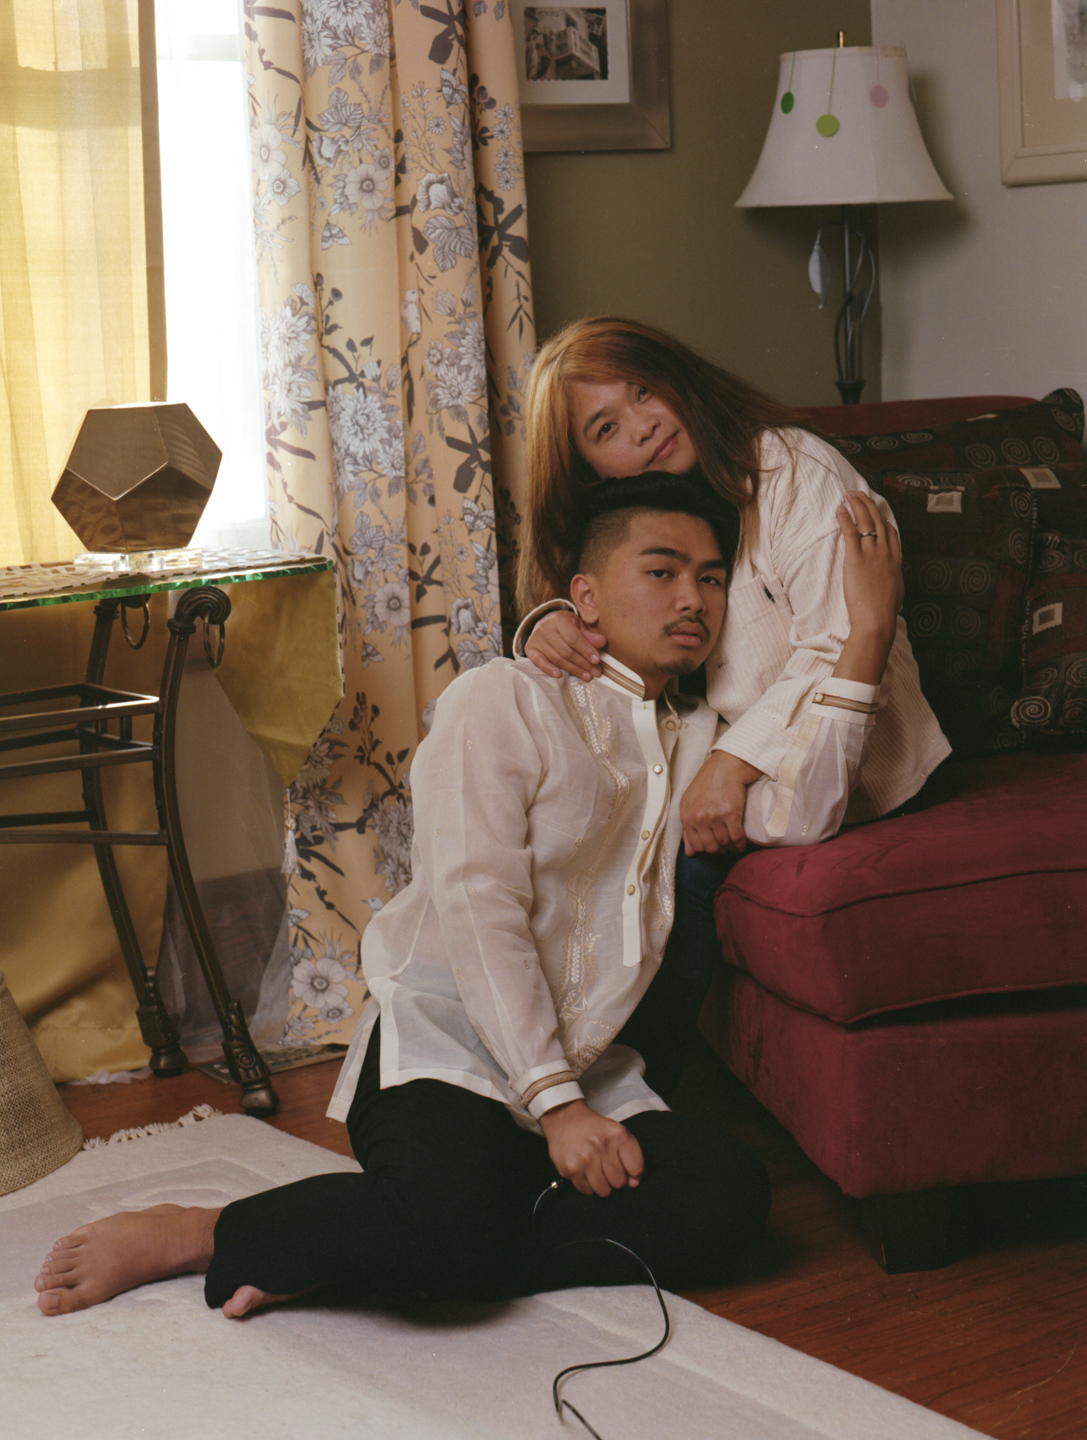 A couple embracing in a living room, example of student photography